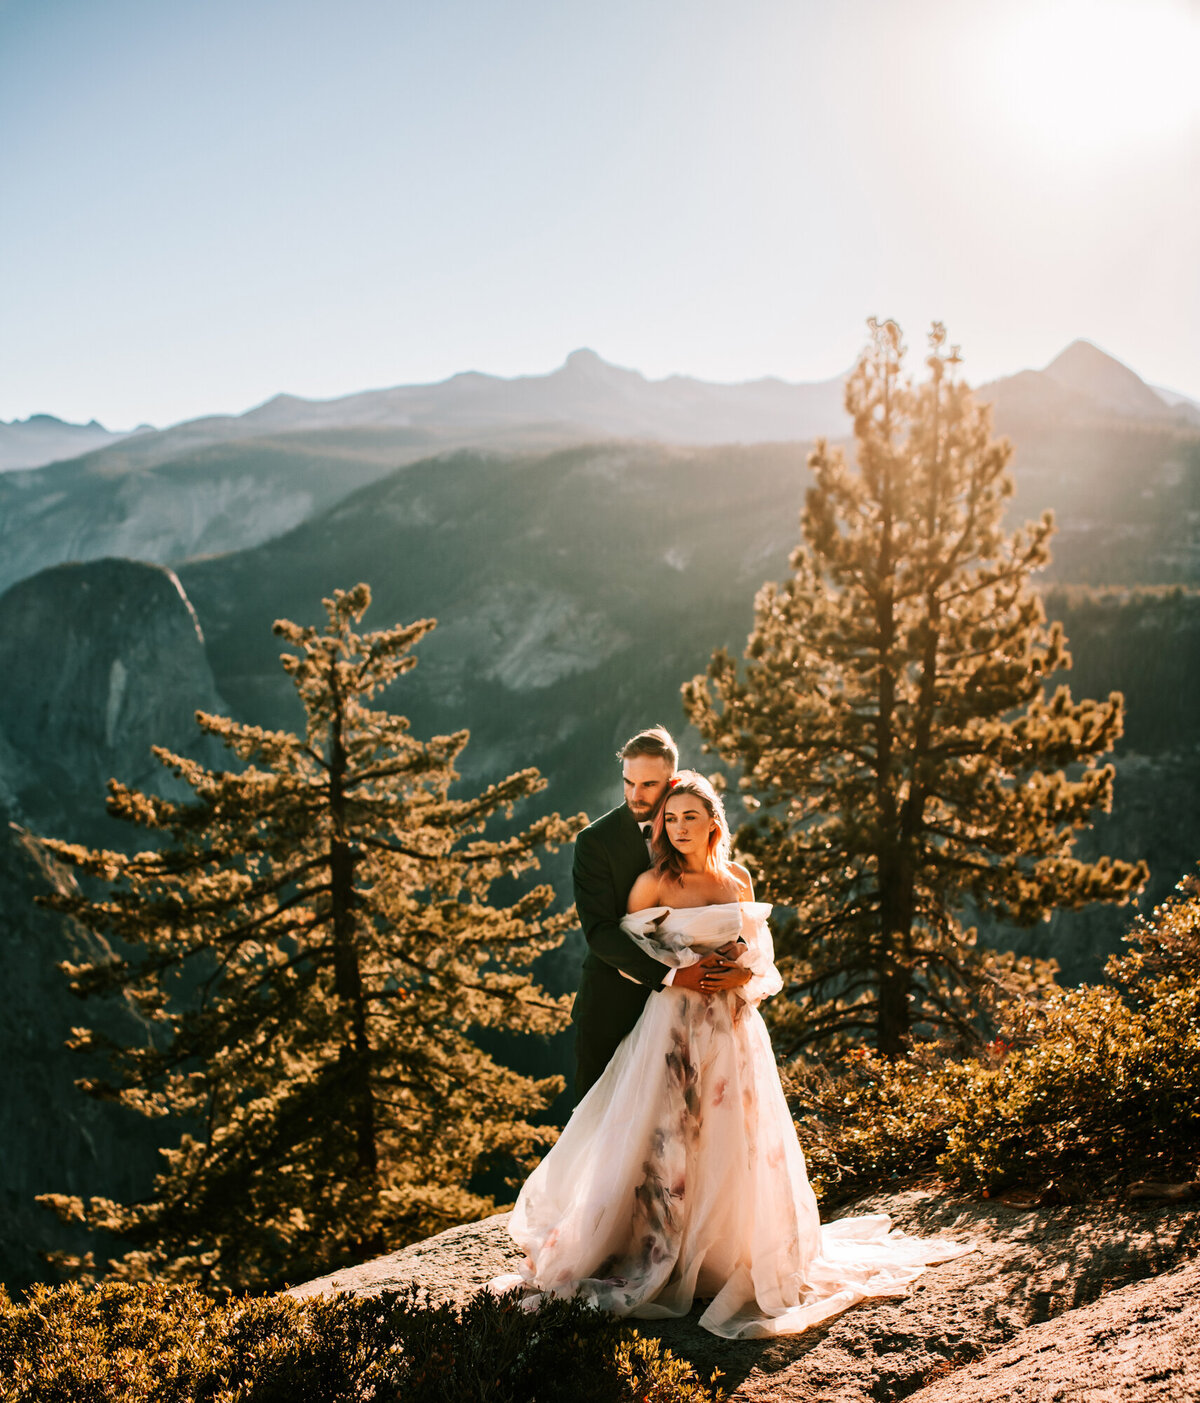 Couples Photography, Man in a blue suit holds onto woman in a wedding dress with the mountains of Yosemite behind them.